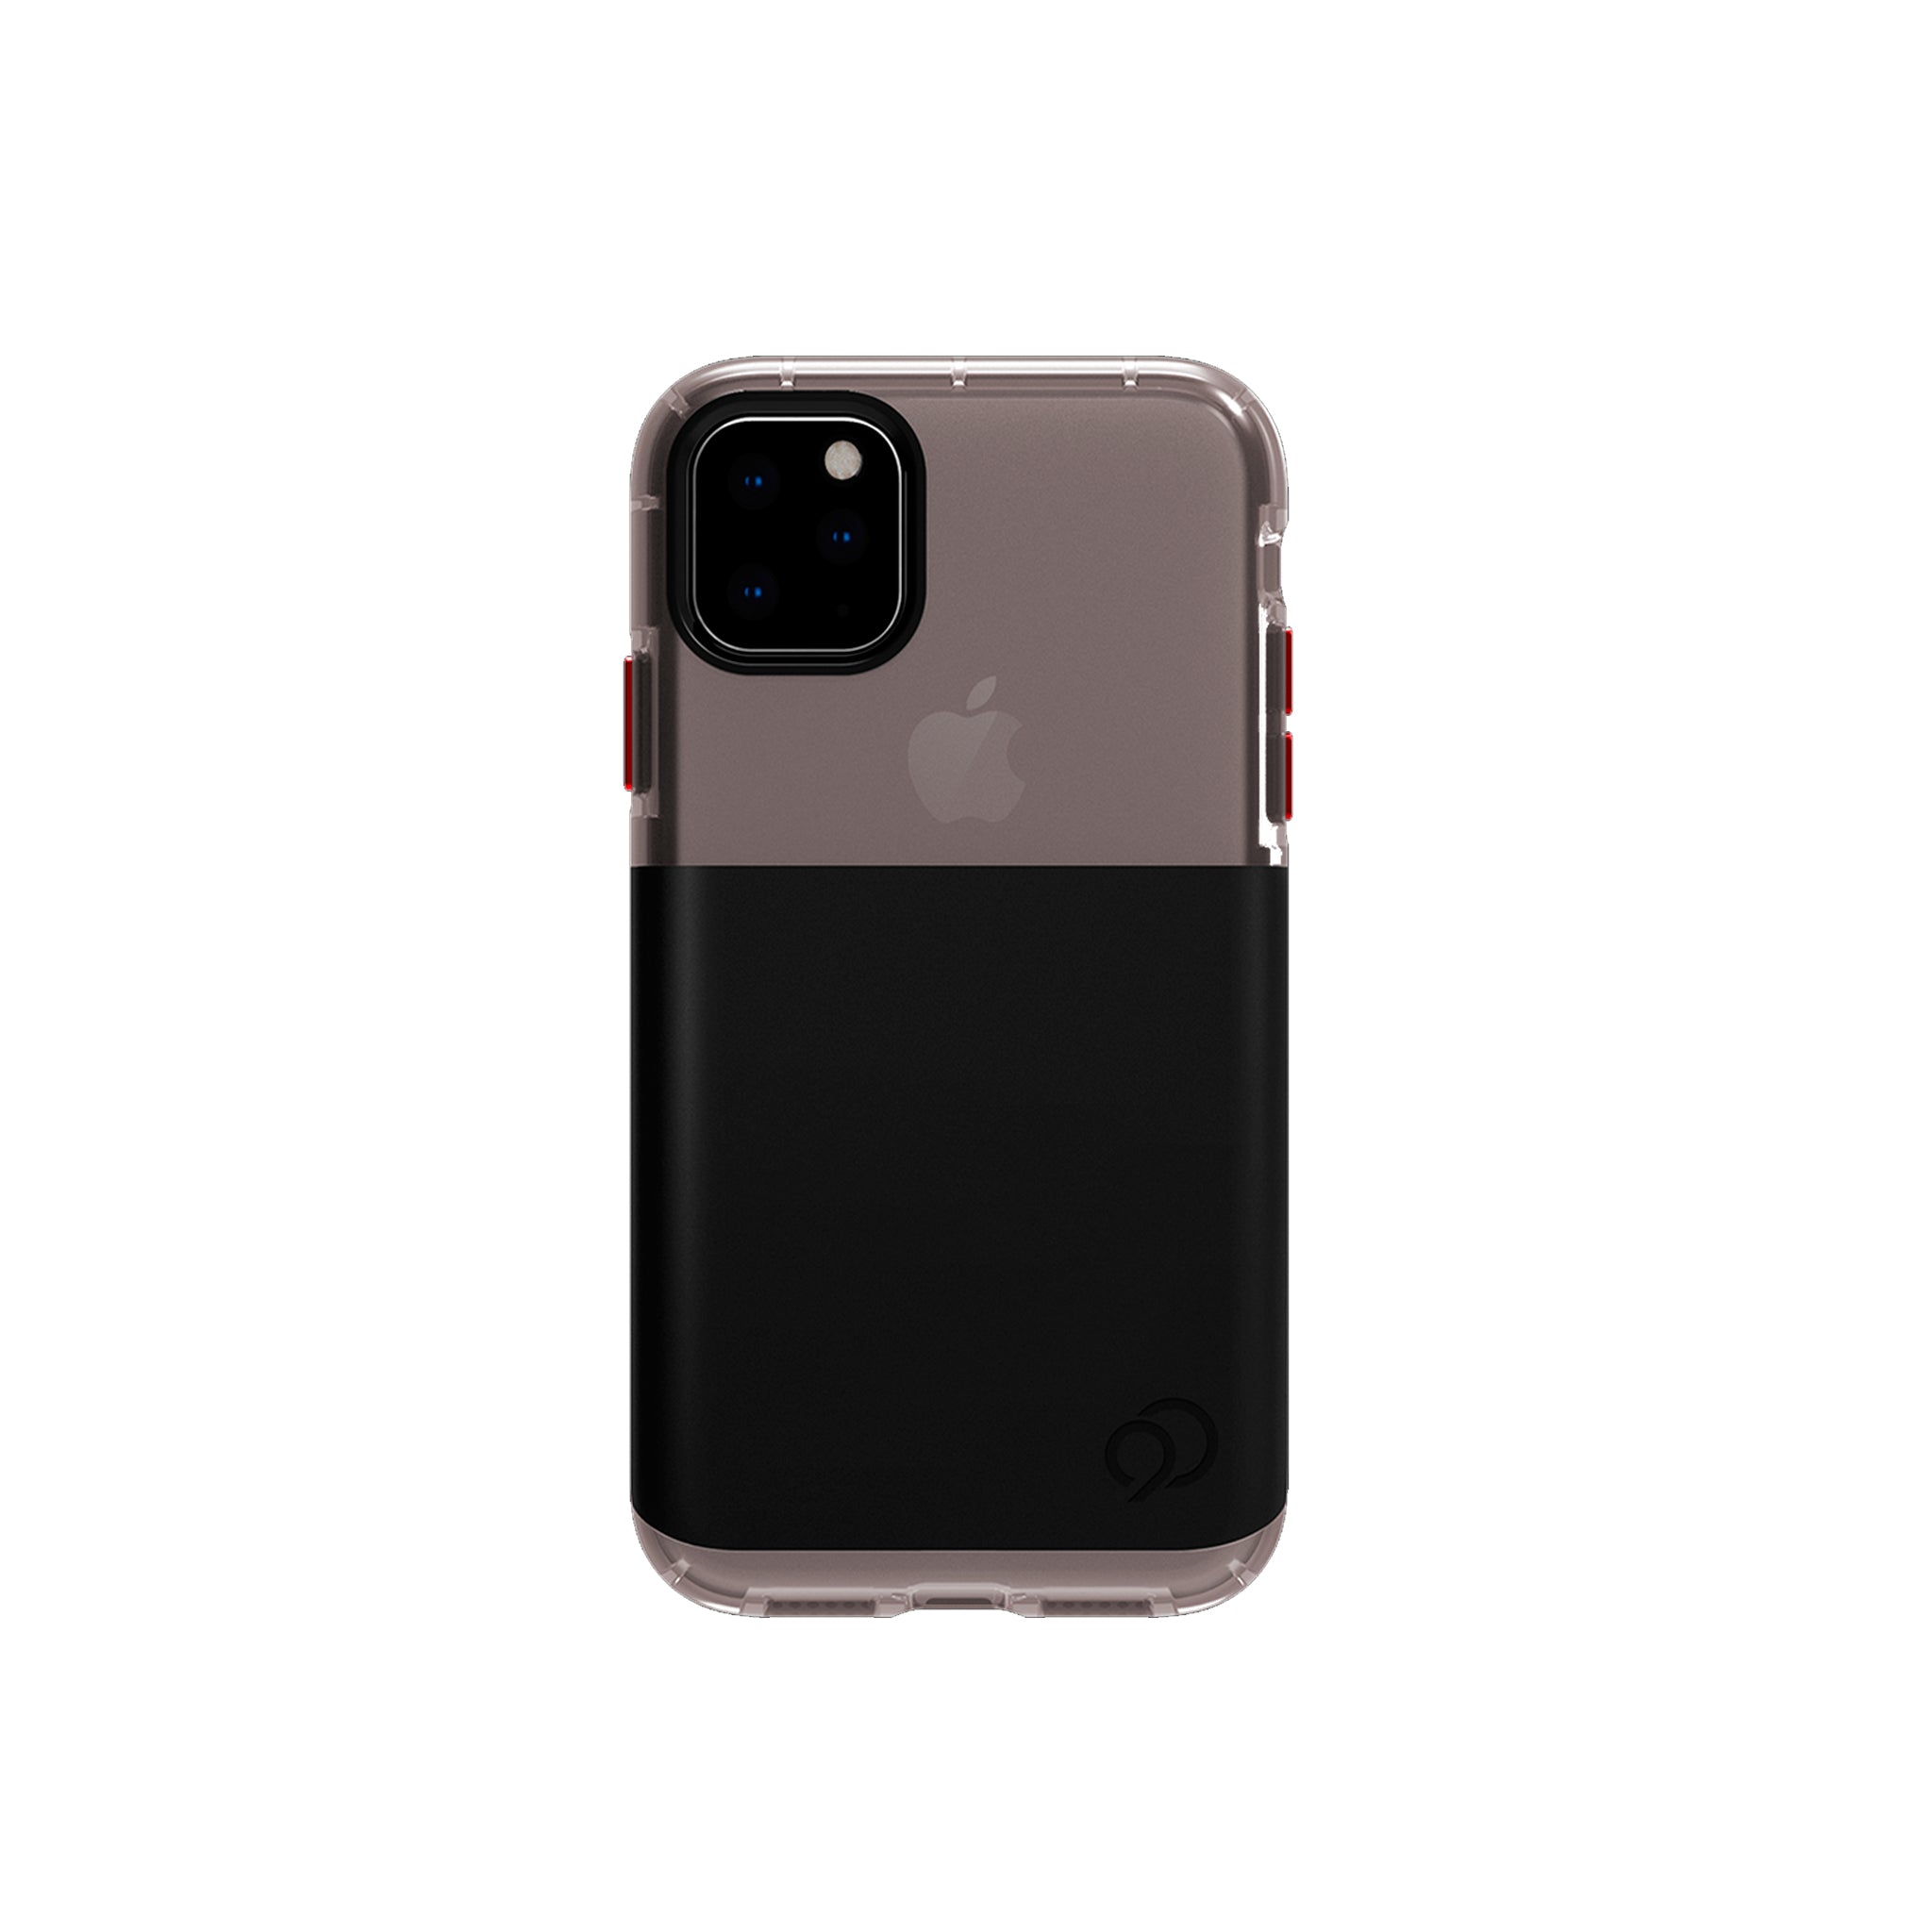 Nimbus9 - Ghost 2 Pro Case With Mount For Apple Iphone 11 Pro / Xs / X - Pitch Black And Crimson